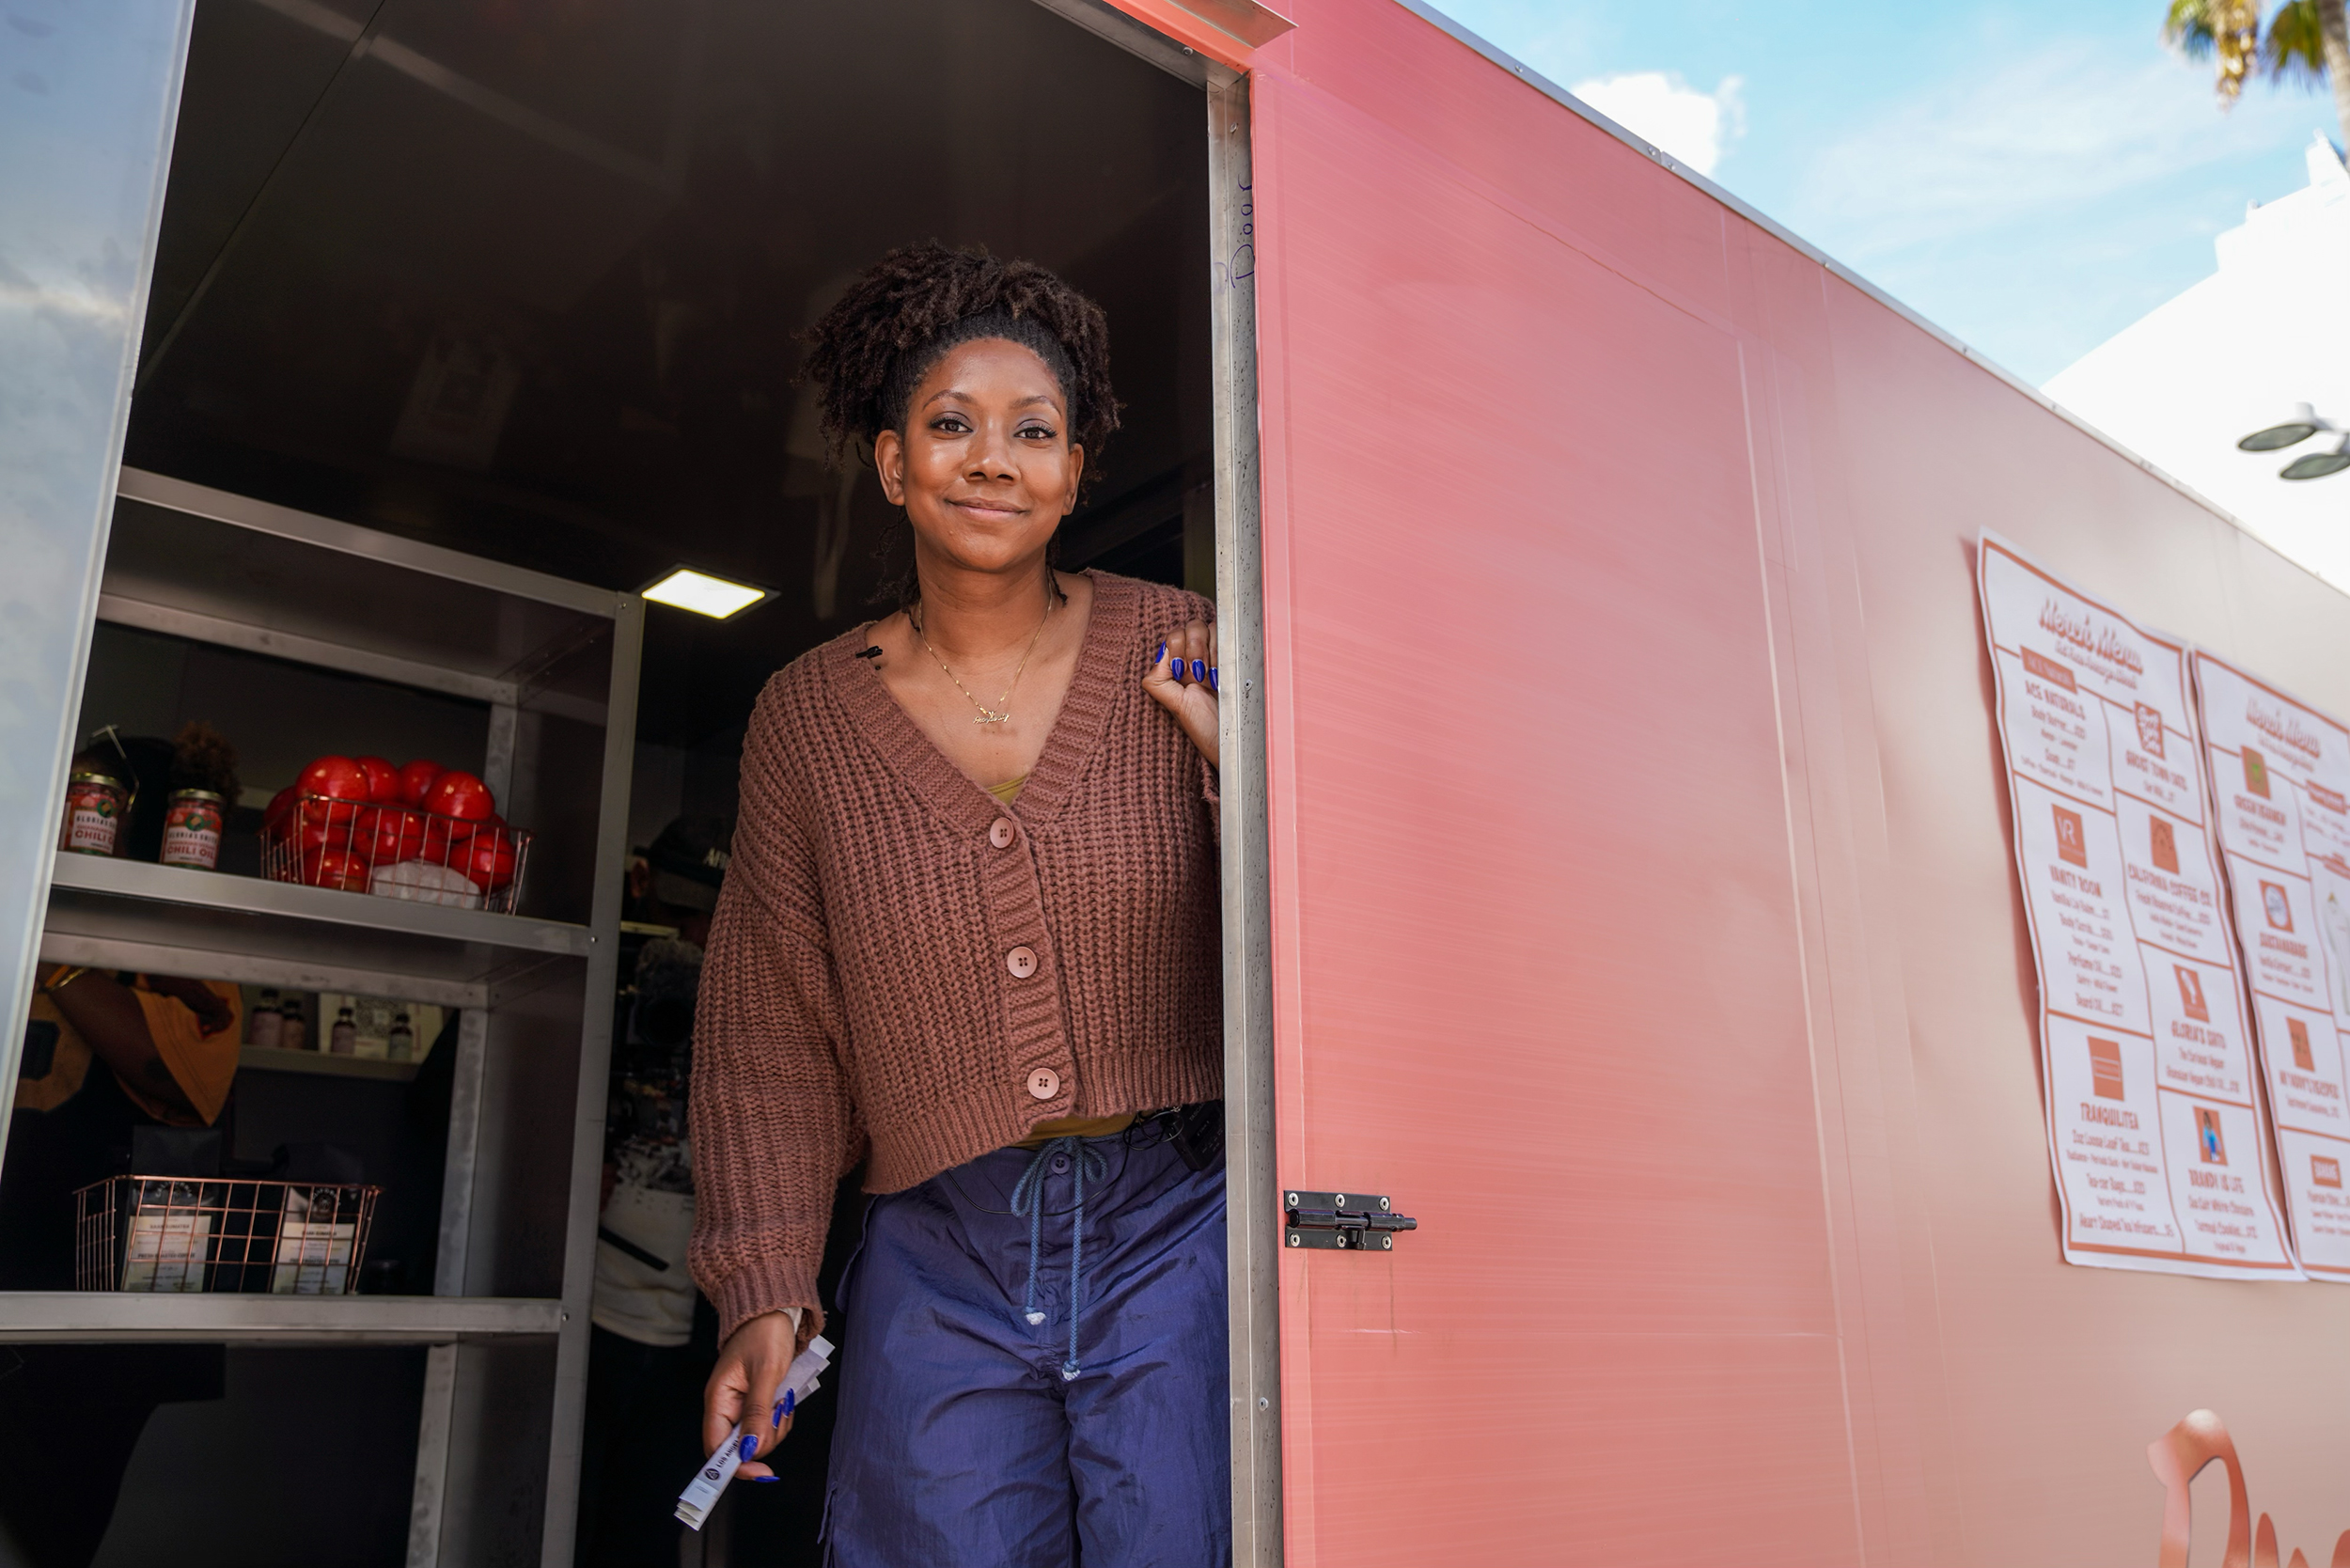 A Black woman poses inside the doorway of a pink trailer with a shelving unit behind her.